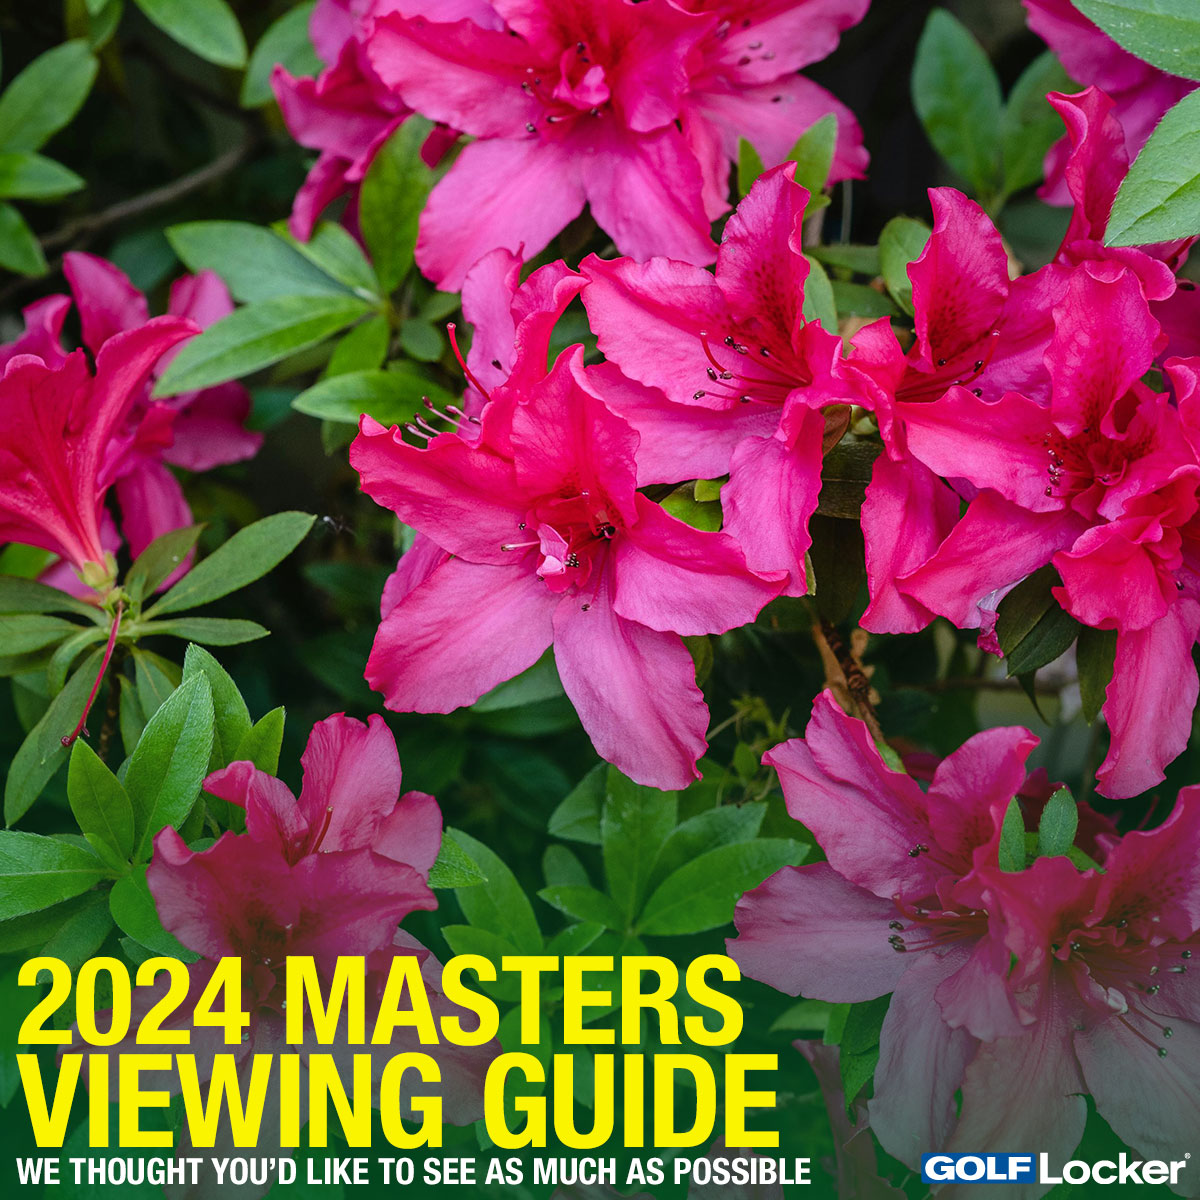 2024 Masters Viewing Guide from Golf Locker